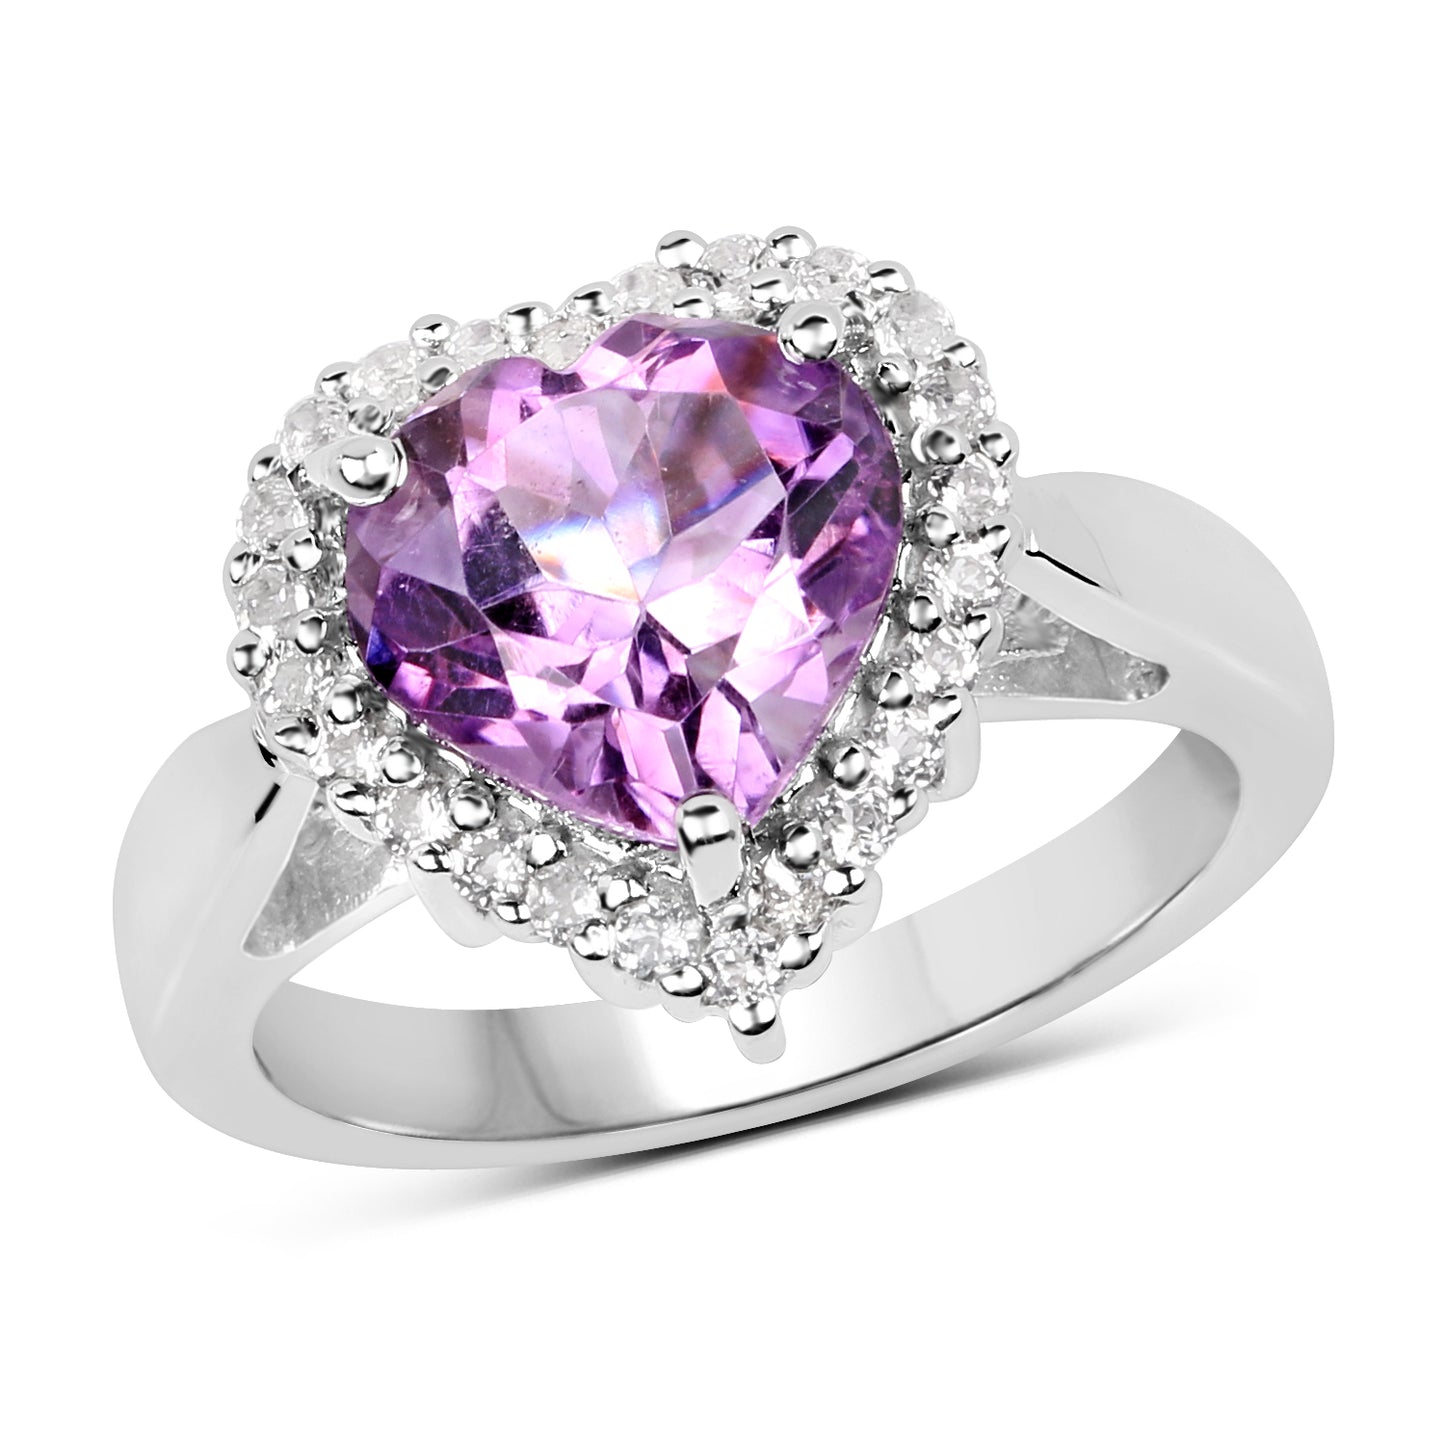 Sterling Silver Amethyst and White Topaz Heart Ring fine